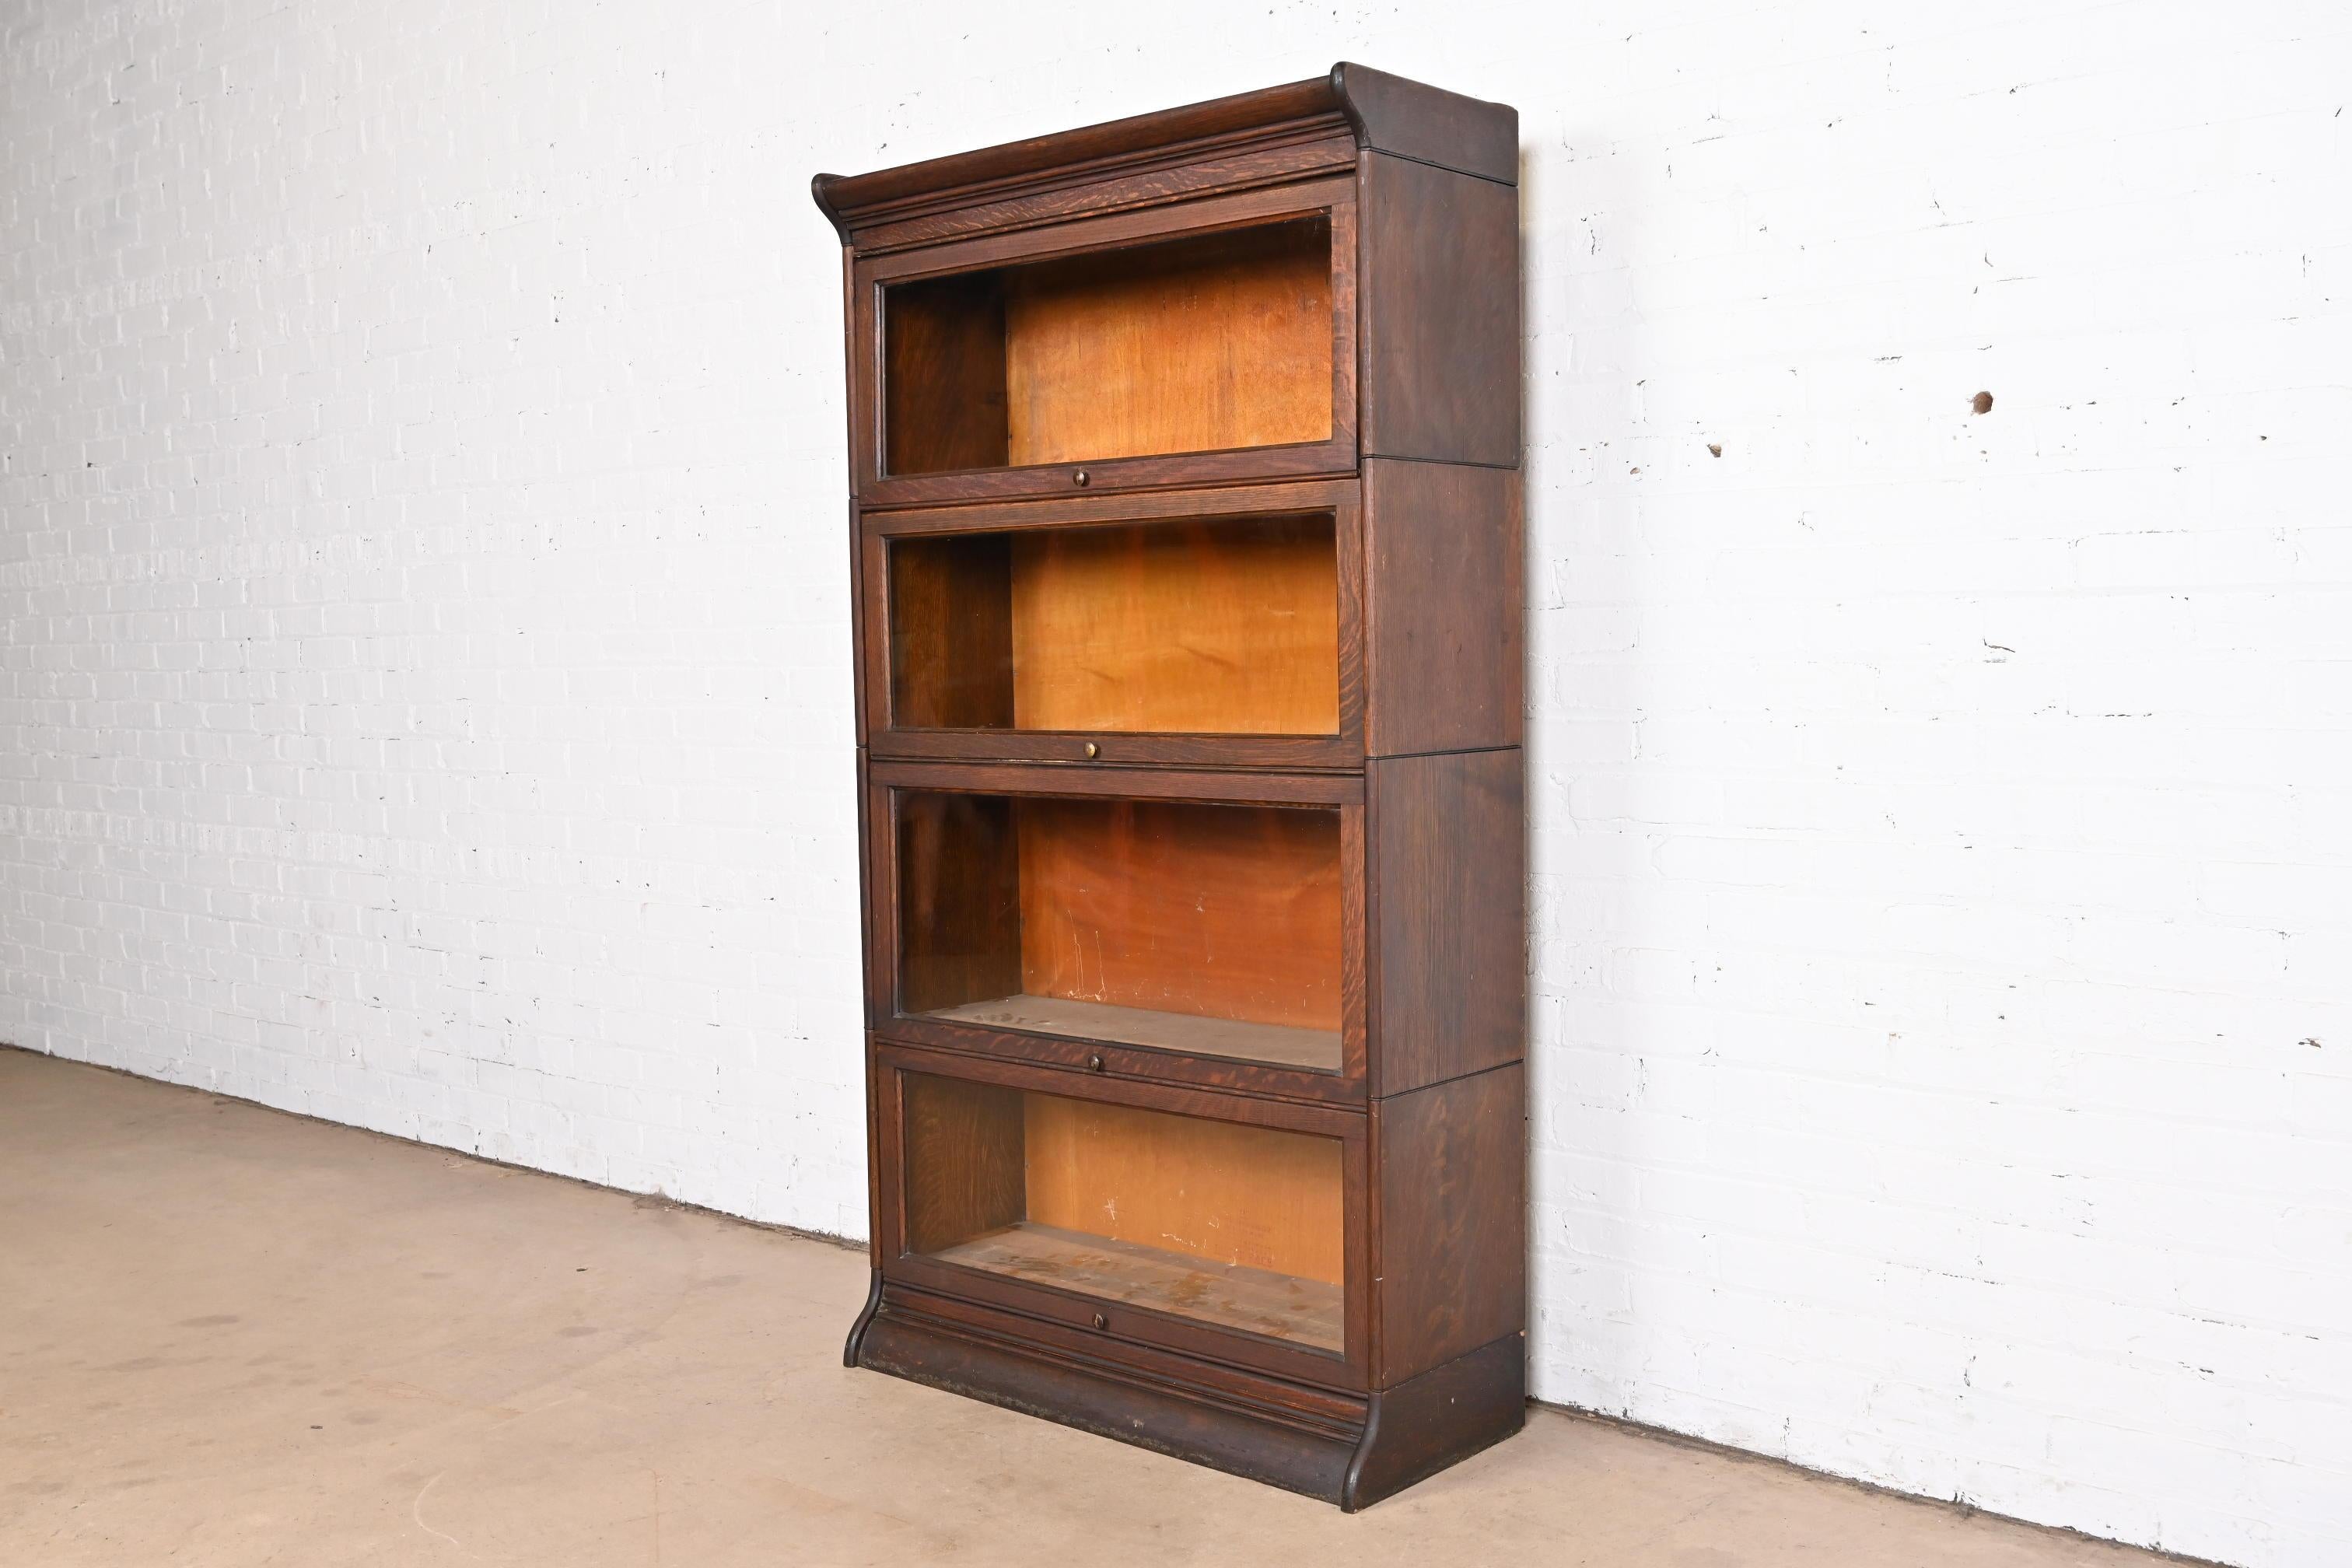 A gorgeous antique Arts and Crafts four-stack barrister bookcase

By Gunn

USA, circa 1920s

Quarter sawn oak, with glass front doors and brass hardware.

Measures: 34.13